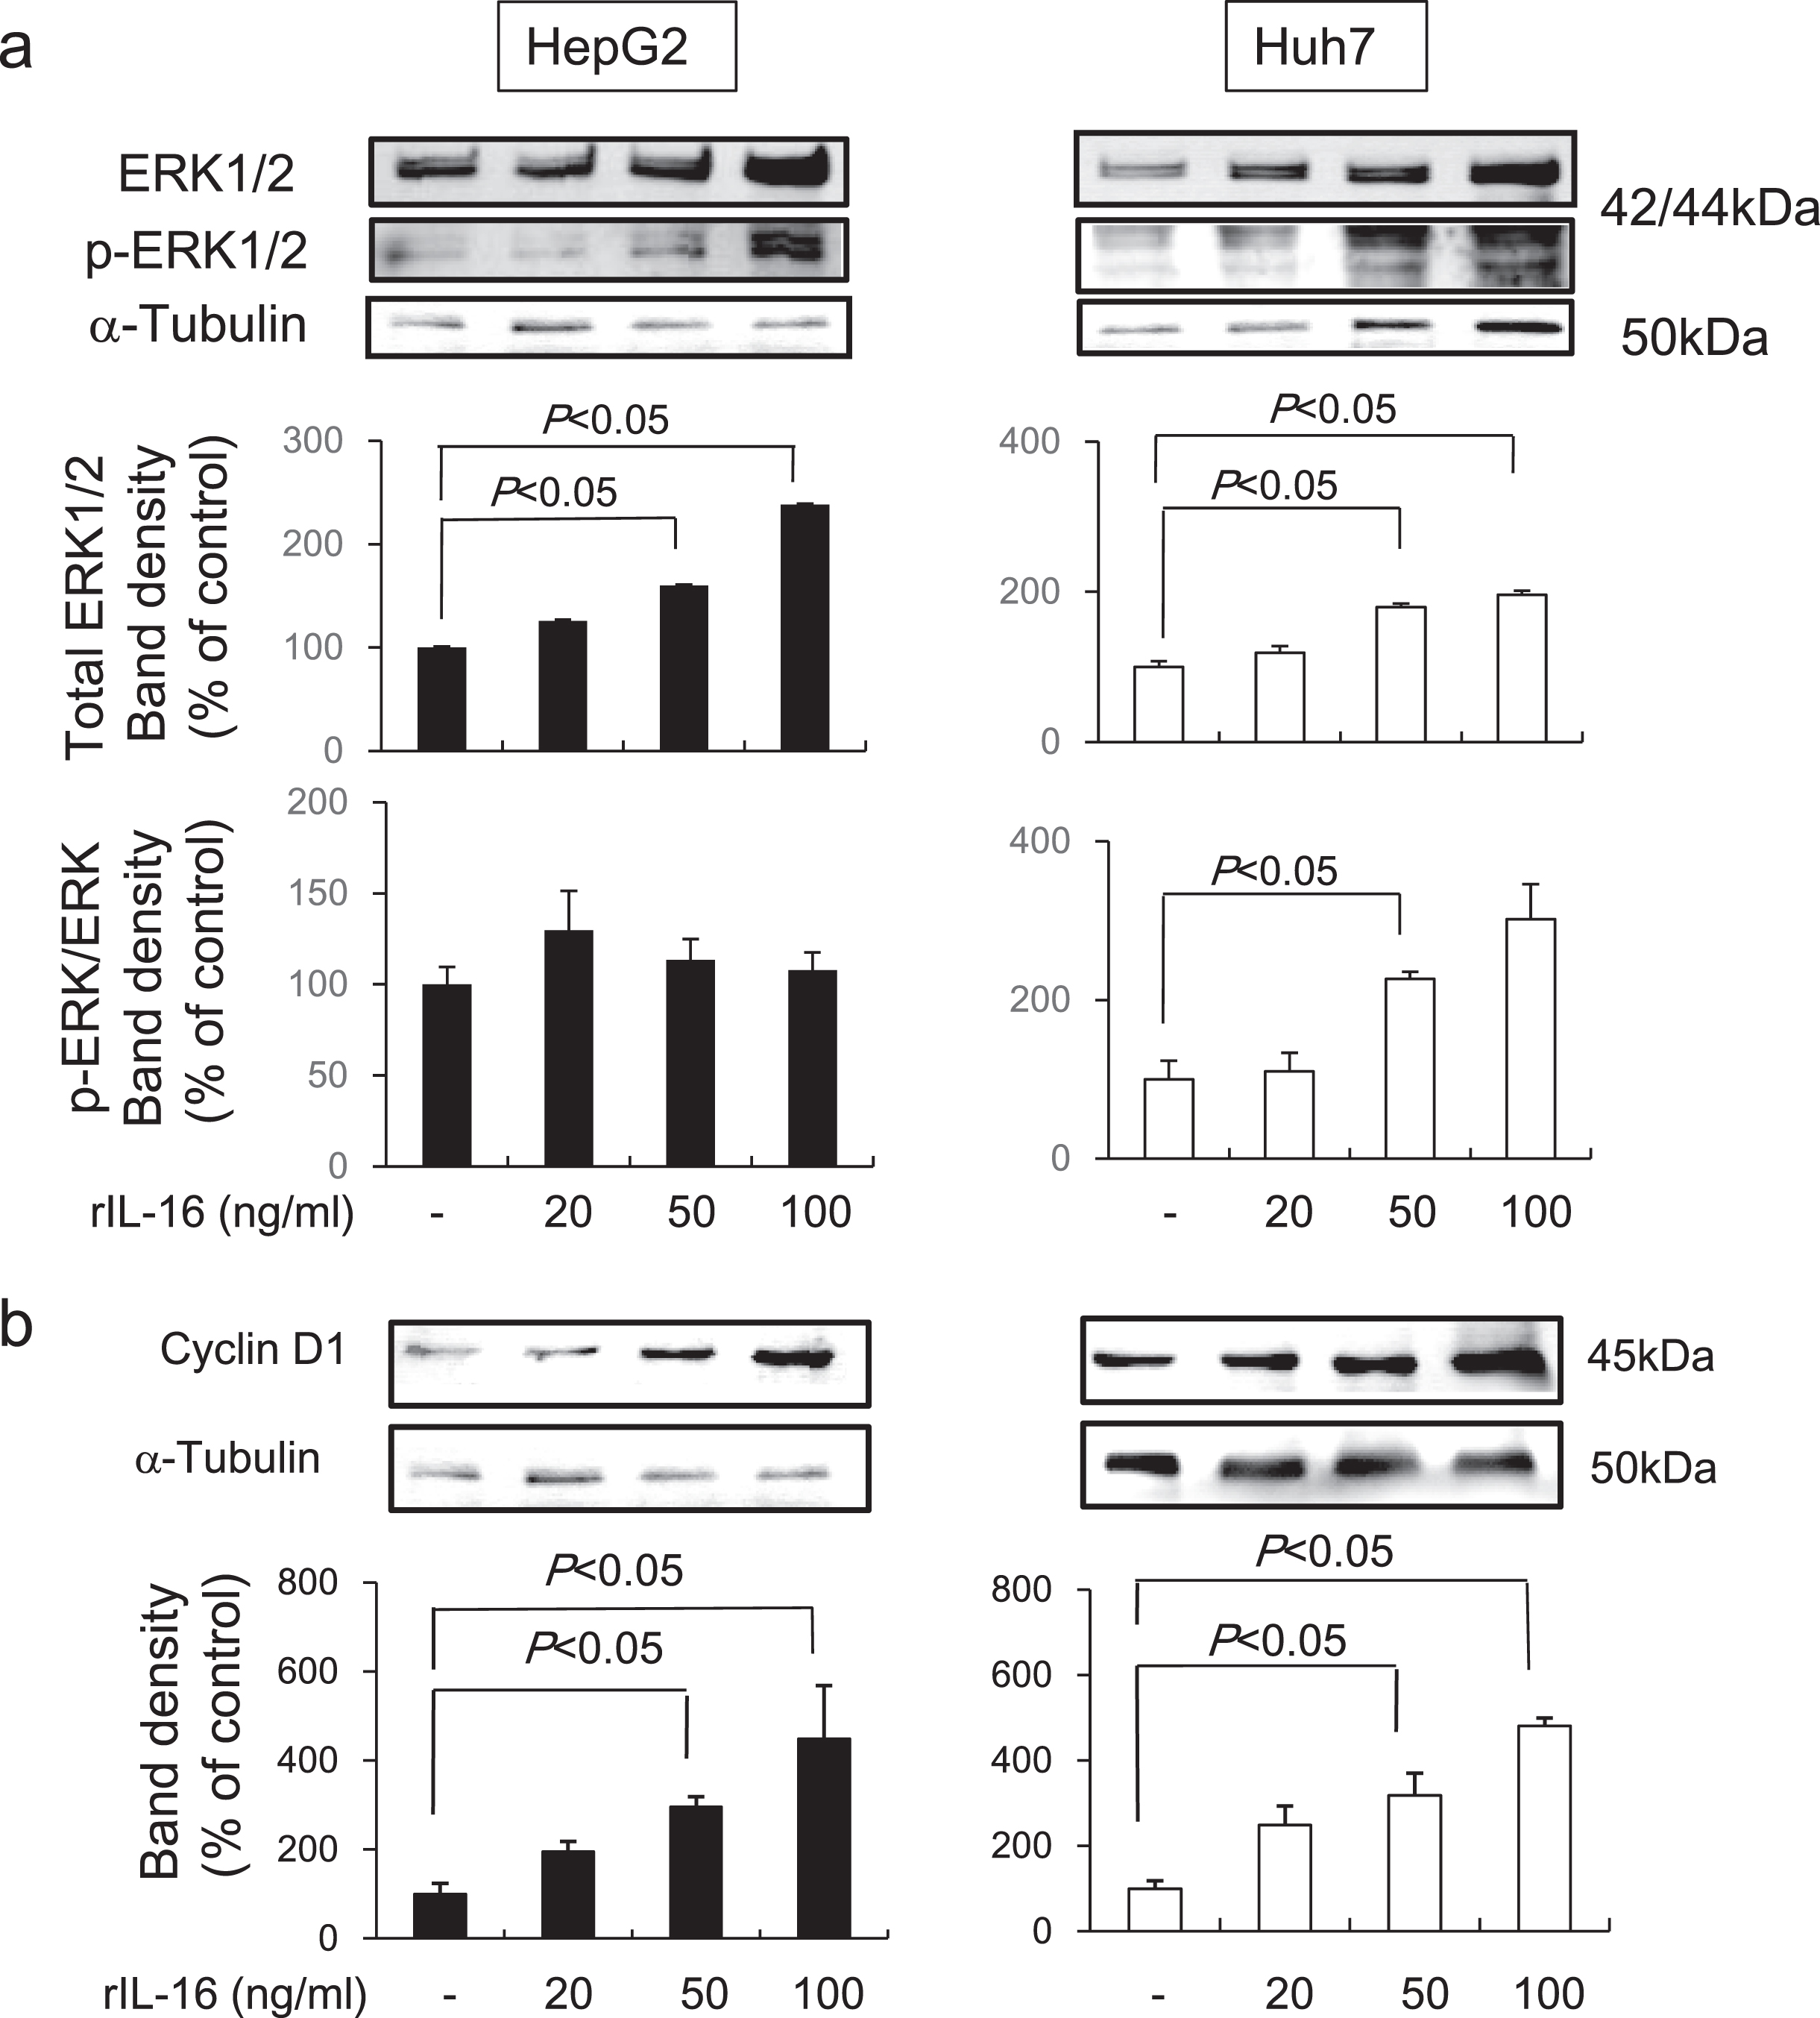 Western blot band intensities of (a) ERK1/2 protein and phosphorylated ERK1/2 protein and (b) cyclin D1 in HCC cell lines. HCC cells were treated with IL-16 for 48 h. Total ERK1/2 increased significantly in HepG2 and Huh7 cells in a dose-dependent manner. Data indicate the mean±SEM. ERK1/2 and phosphorylated ERK1/2 data are representative of six independent experiments. Cyclin D1 data are representative of five (HepG2) and six (Huh7) independent experiments. α-Tubulin was used as a loading control and to normalize protein intensities. ERK, extracellular signal-regulated protein kinase.